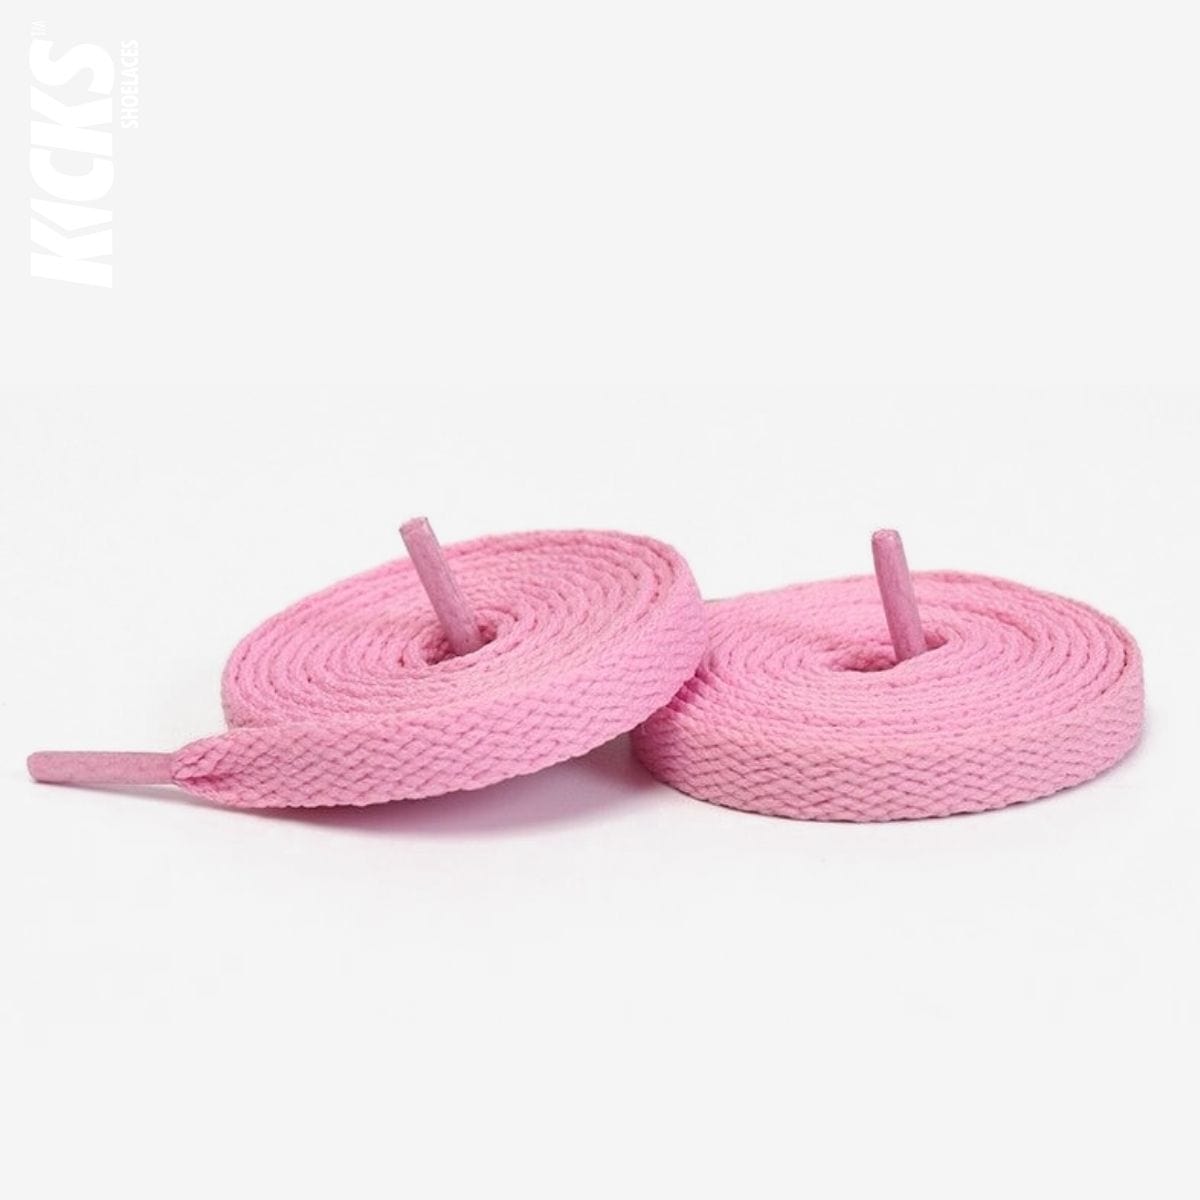 pink-fun-shoelaces-suitable-for-tying shoelaces-on-popular-sneakers